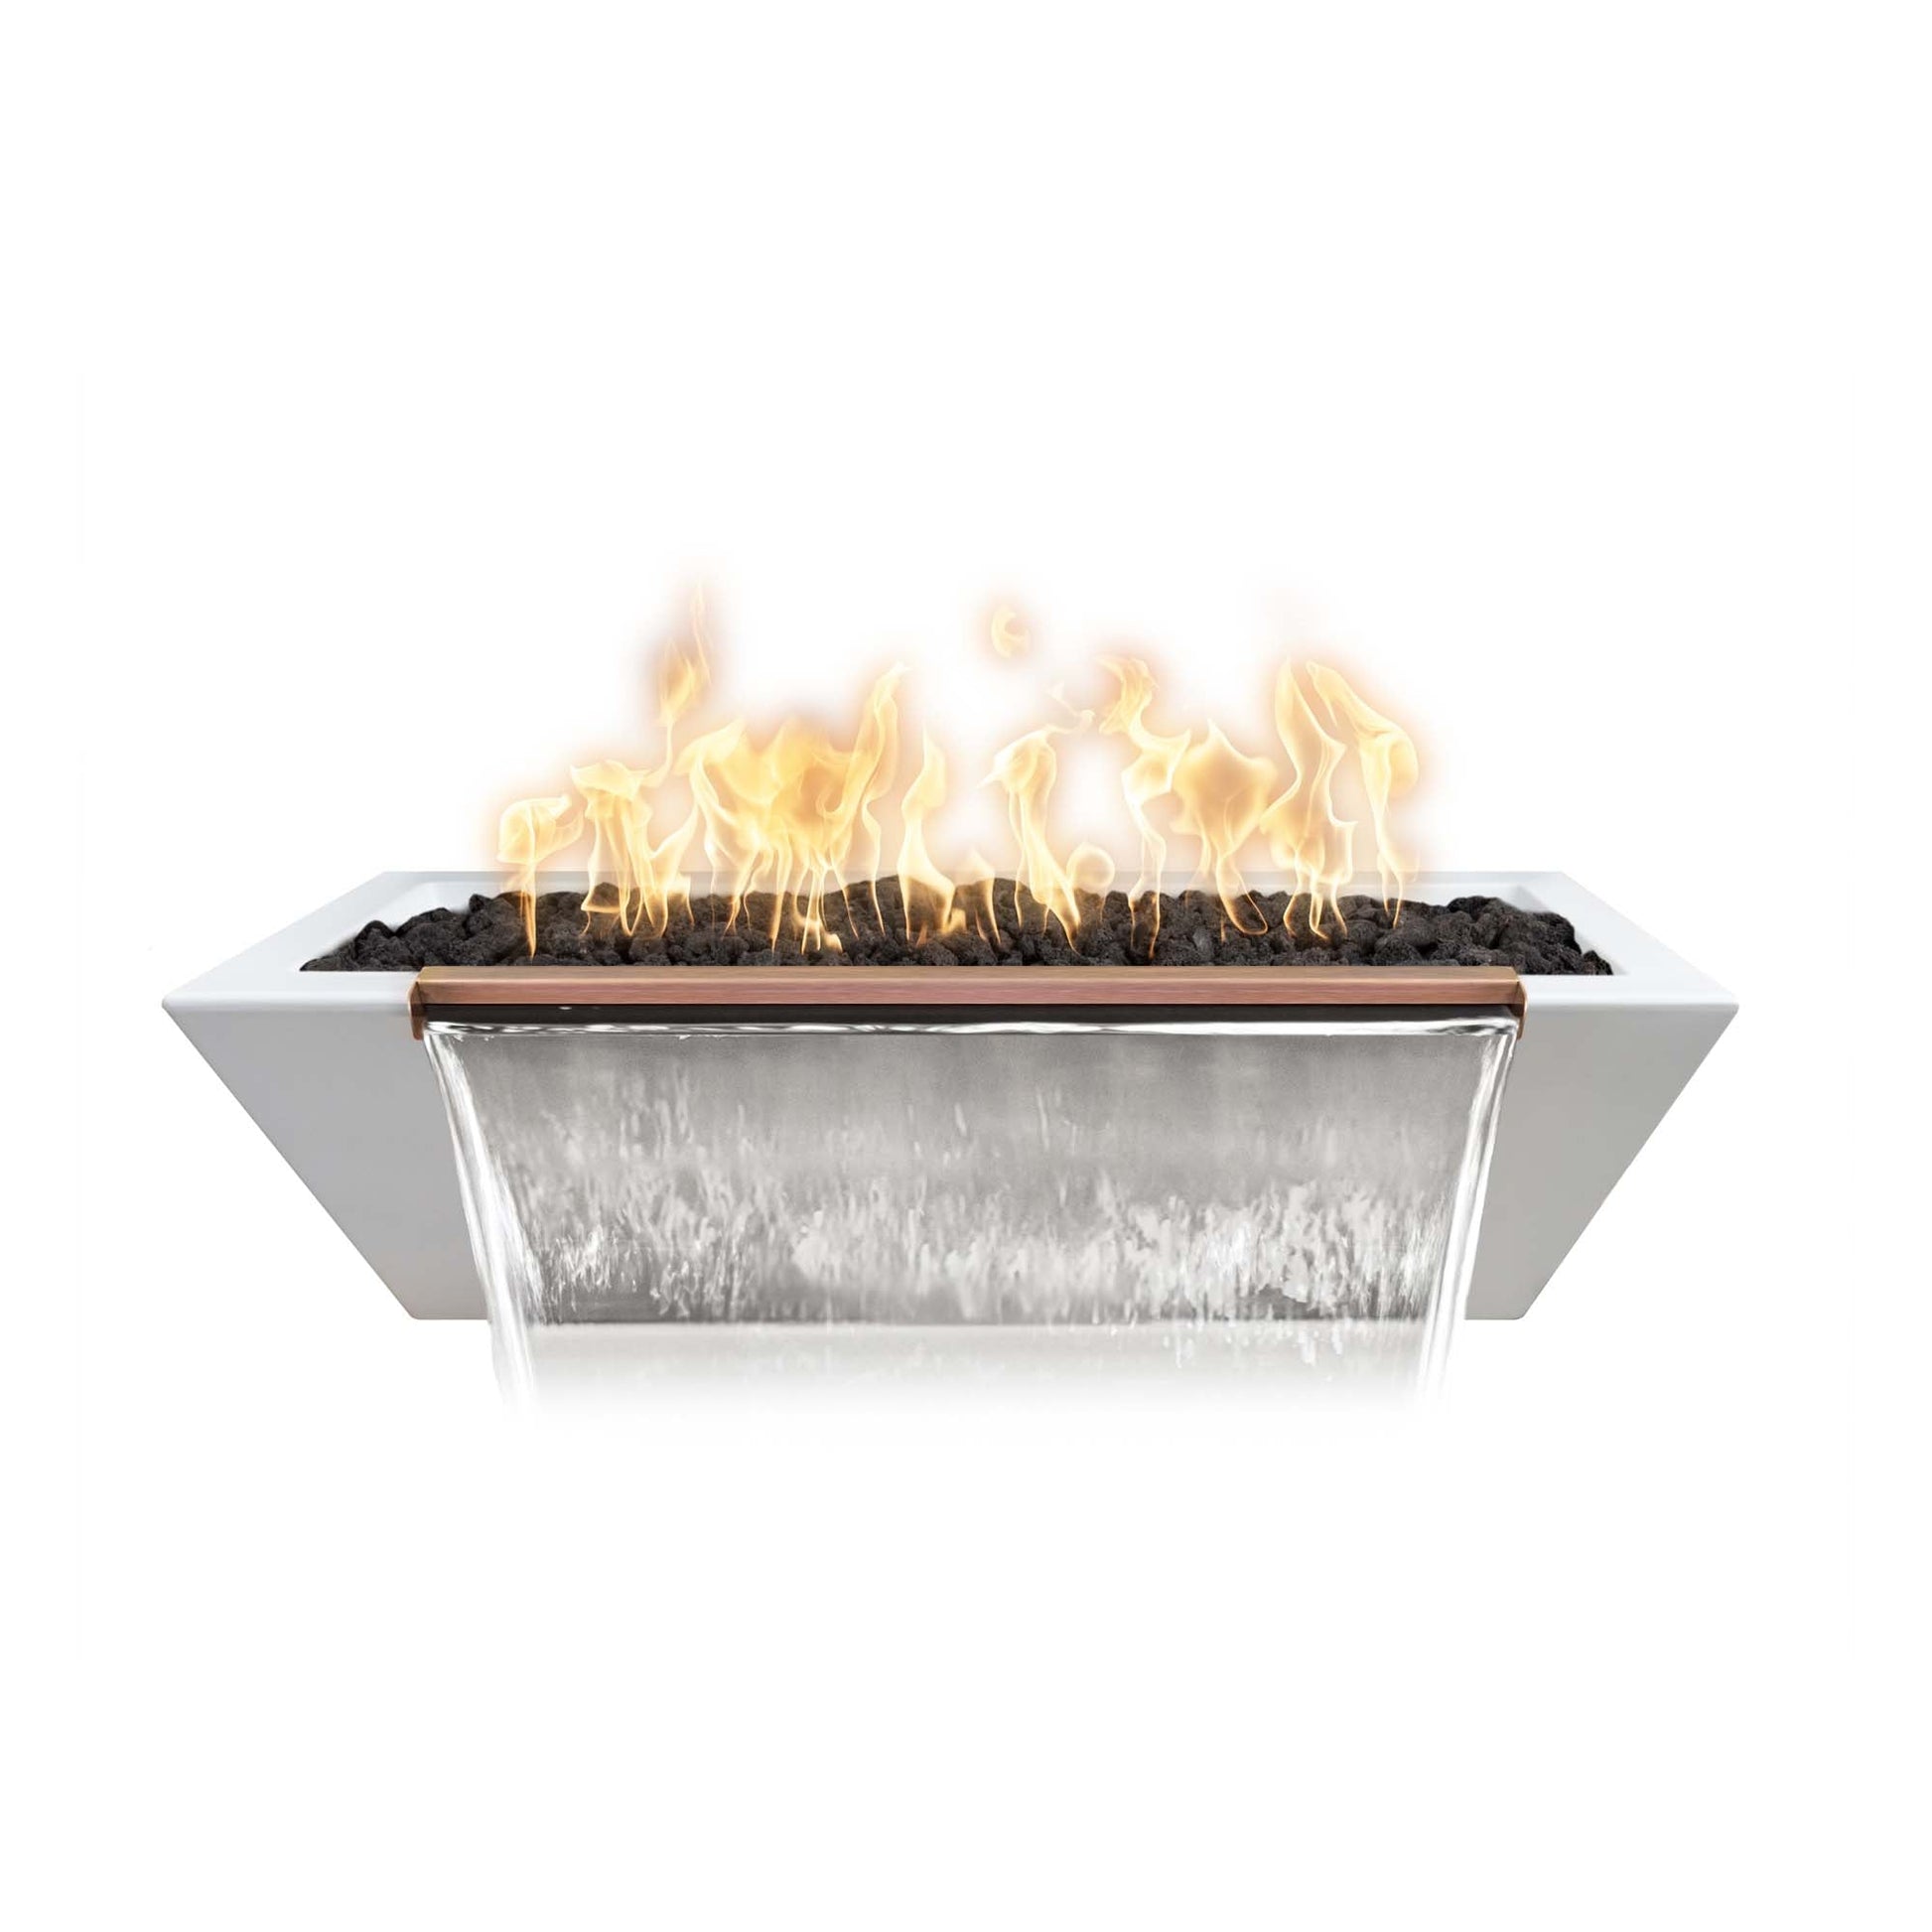 The Outdoor Plus Linear Maya 72" Brown GFRC Concrete Liquid Propane Fire & Water Bowl with Match Lit Ignition